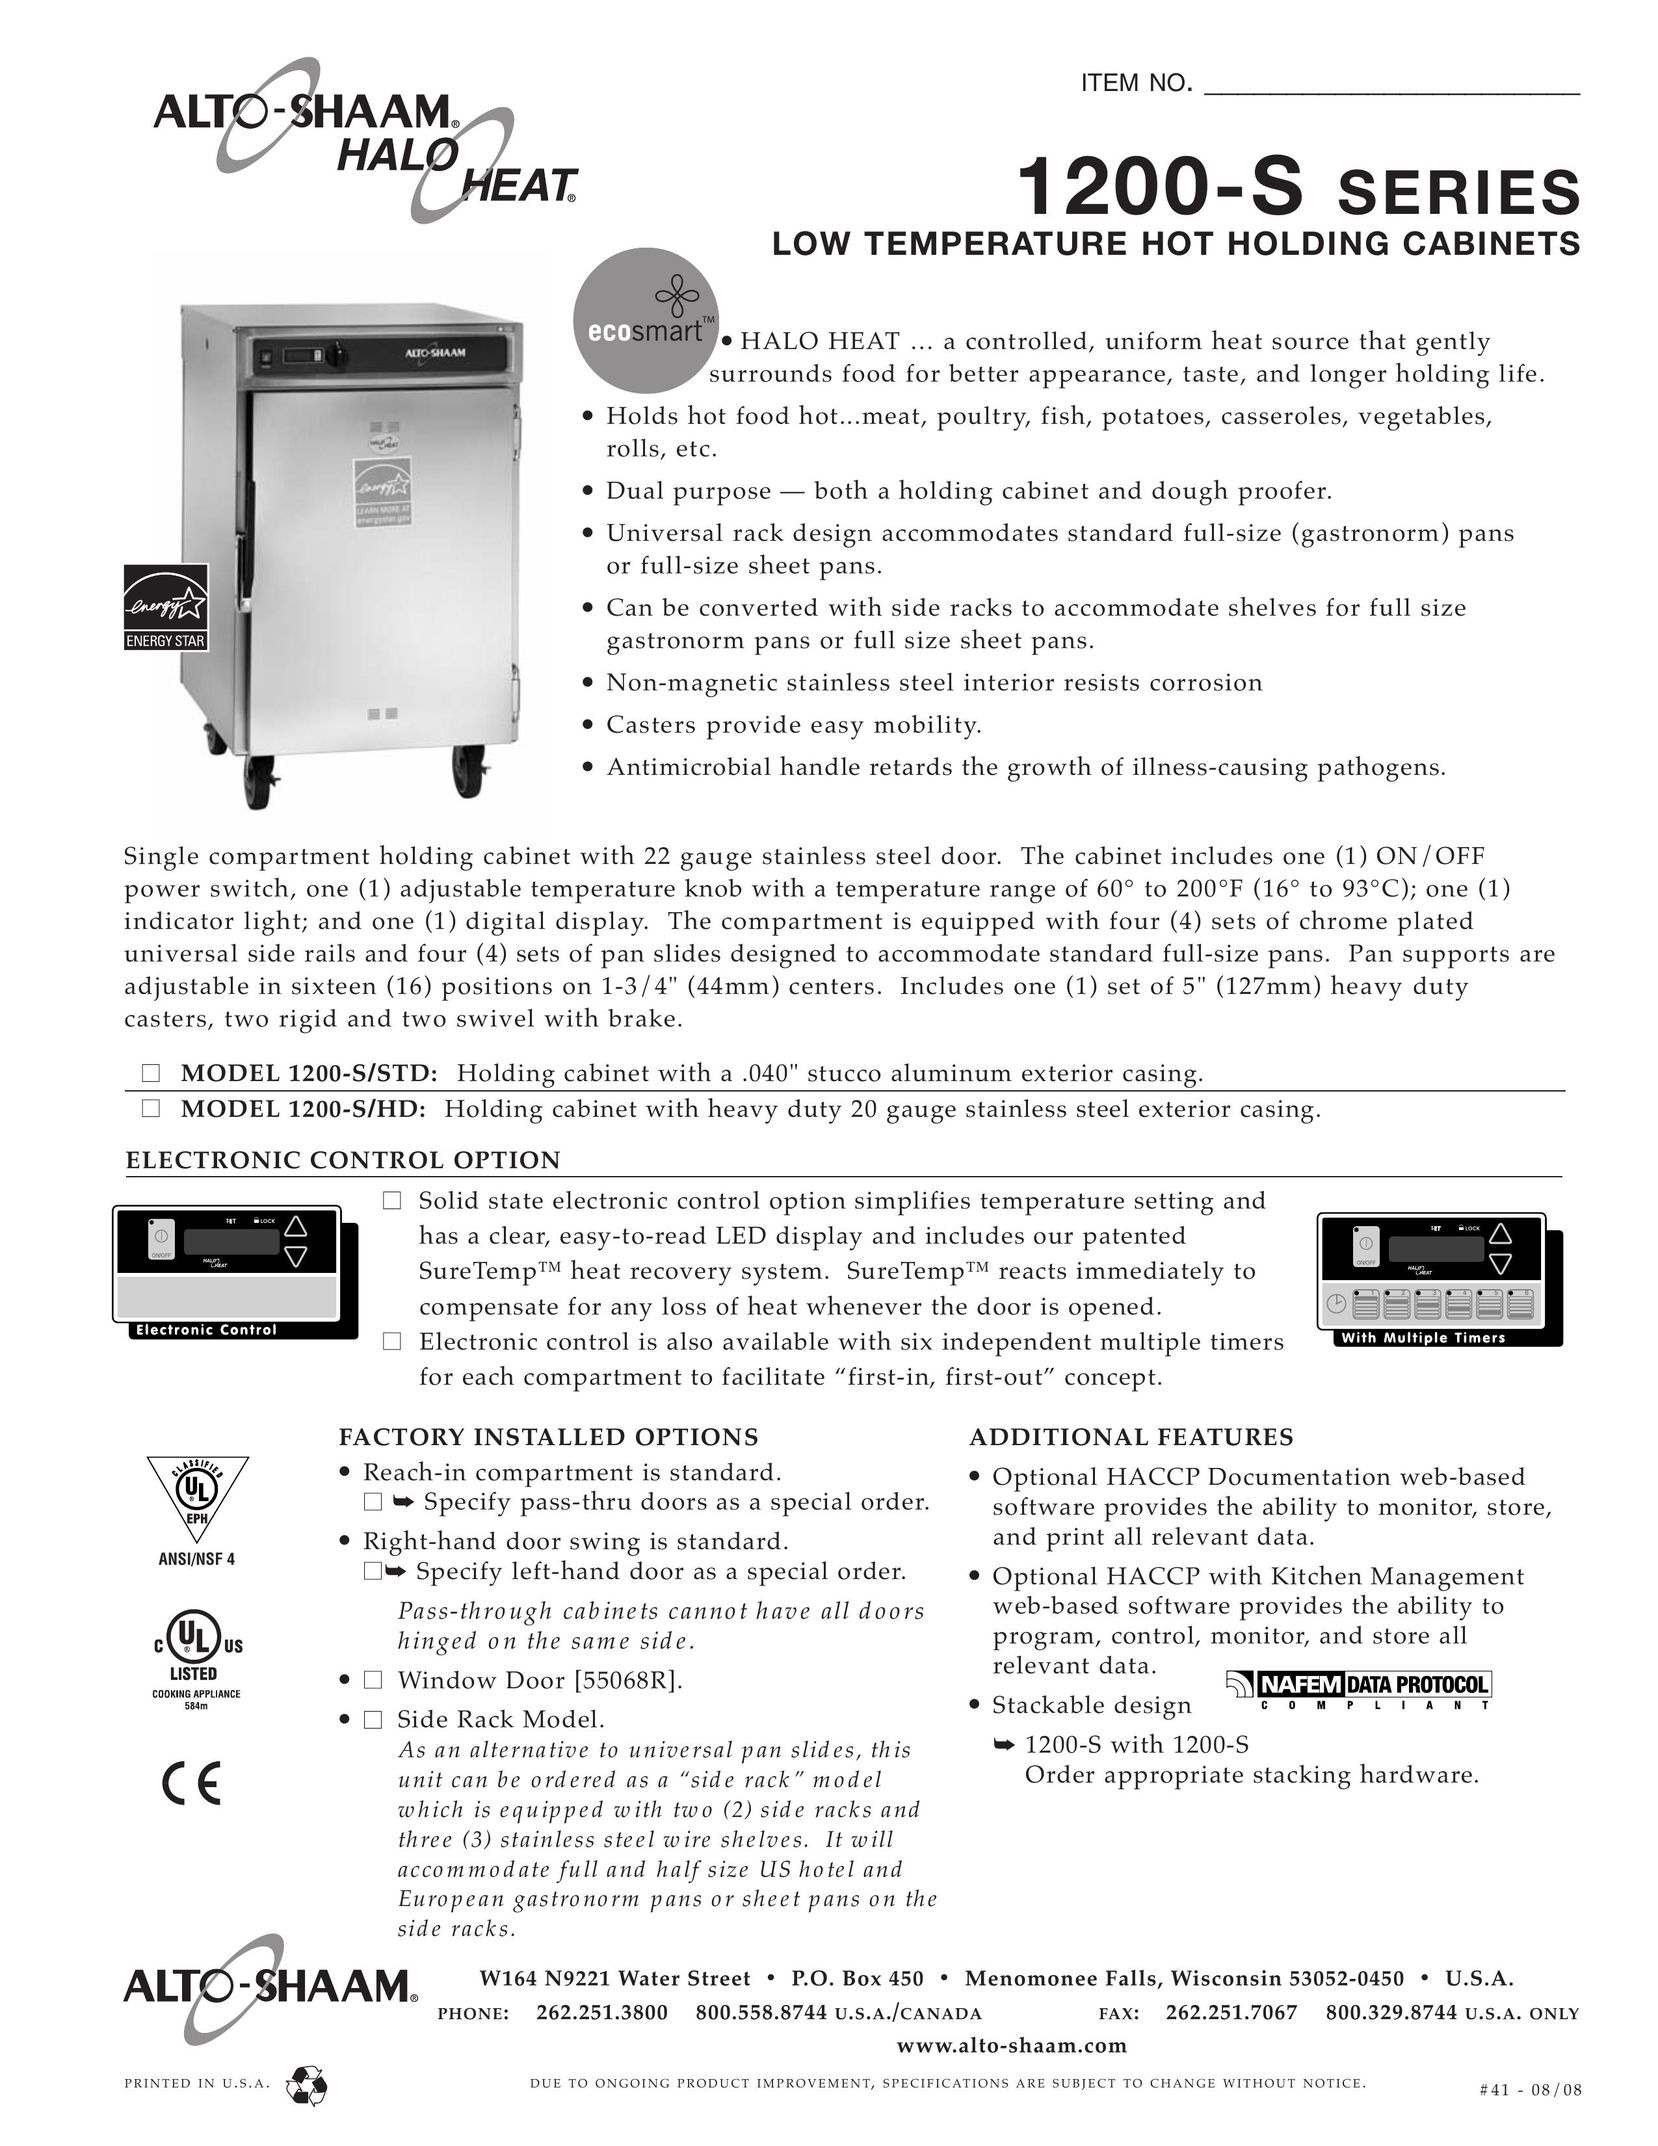 Alto-Shaam 1200-S Series Oven User Manual